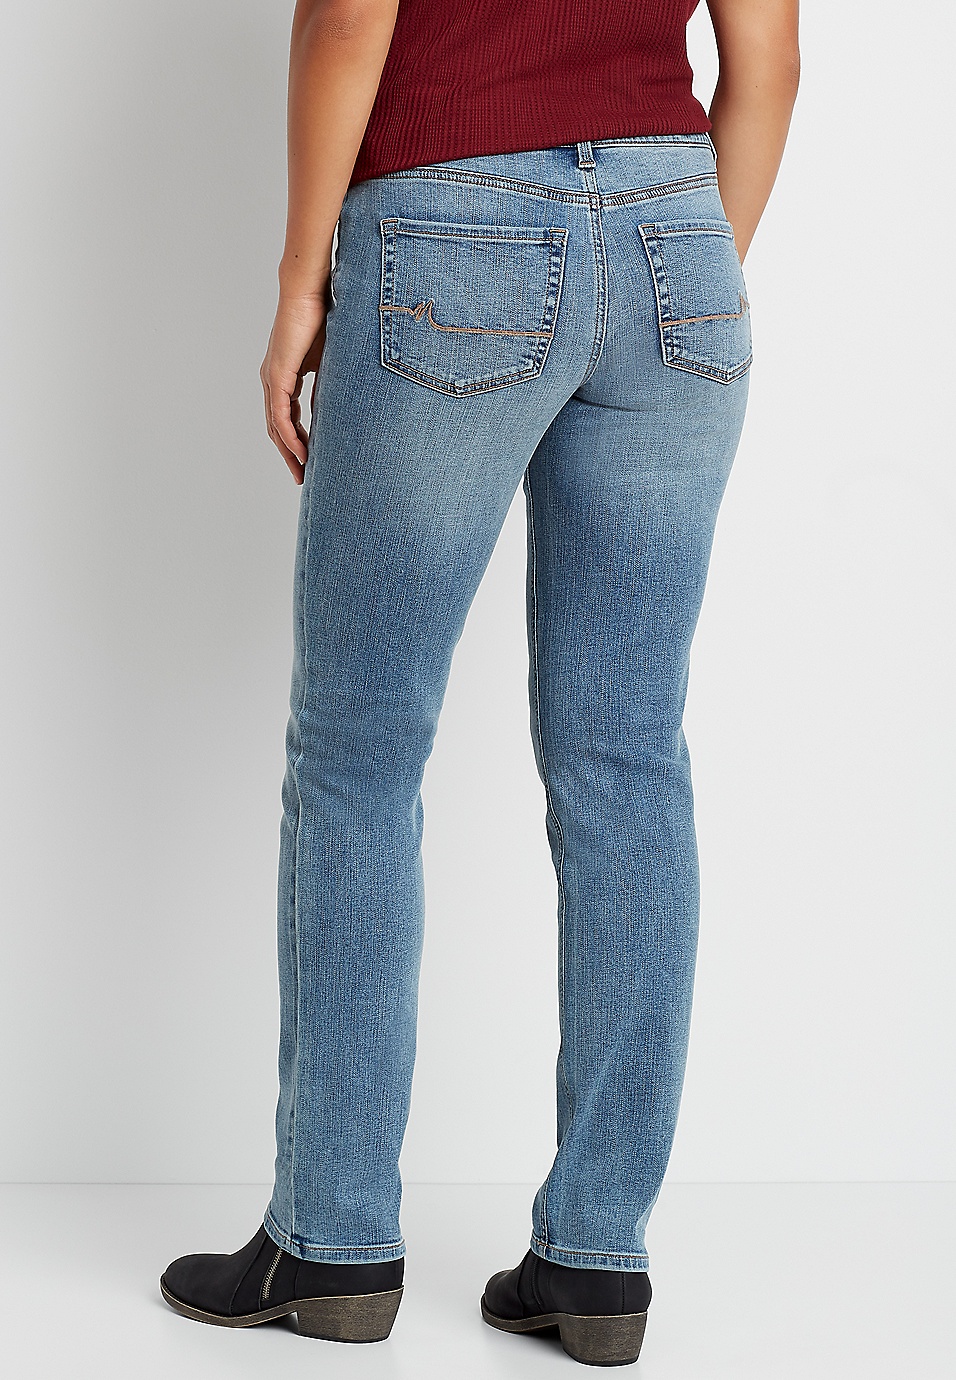 Levi's Women's Classic Modern Mid-Rise Skinny Ankle Jeans